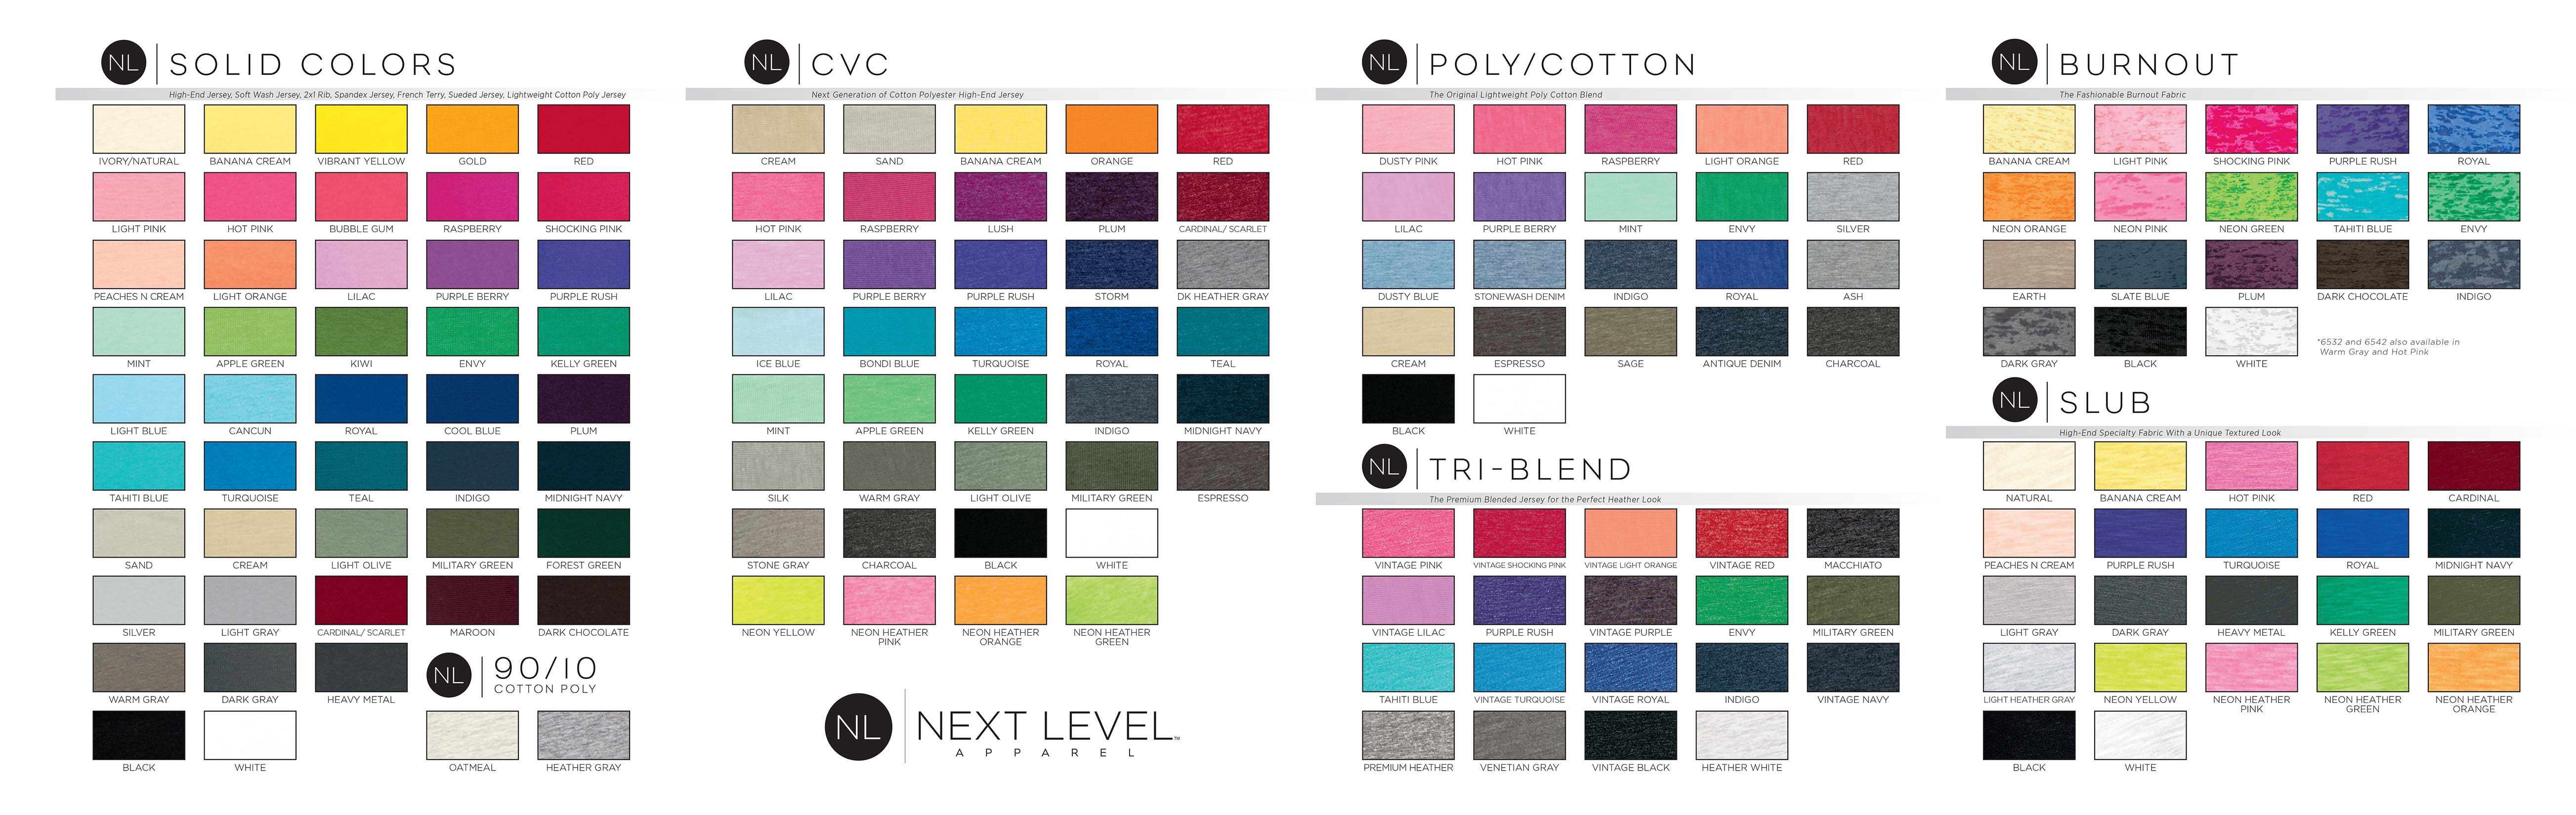 Next Level Tee Blank Colors